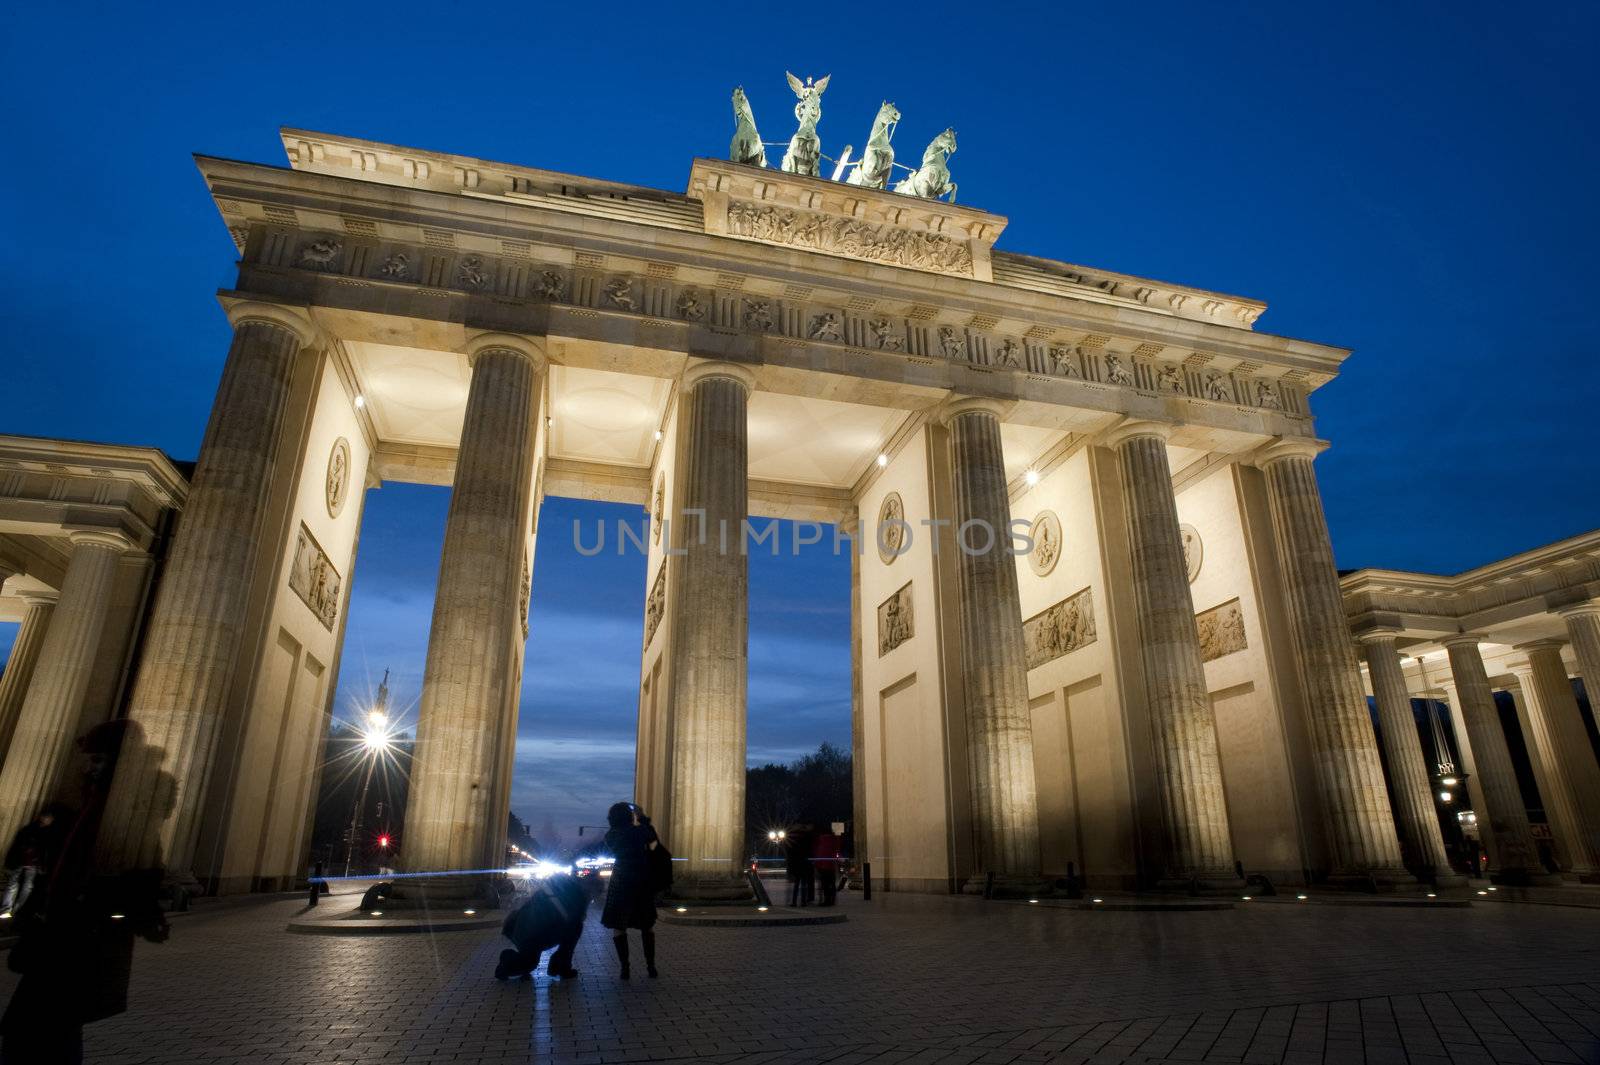 Low angle view of the historical Brandenburg Gate, or Brandenburger Tor, Berlin, Germany illuminated at night